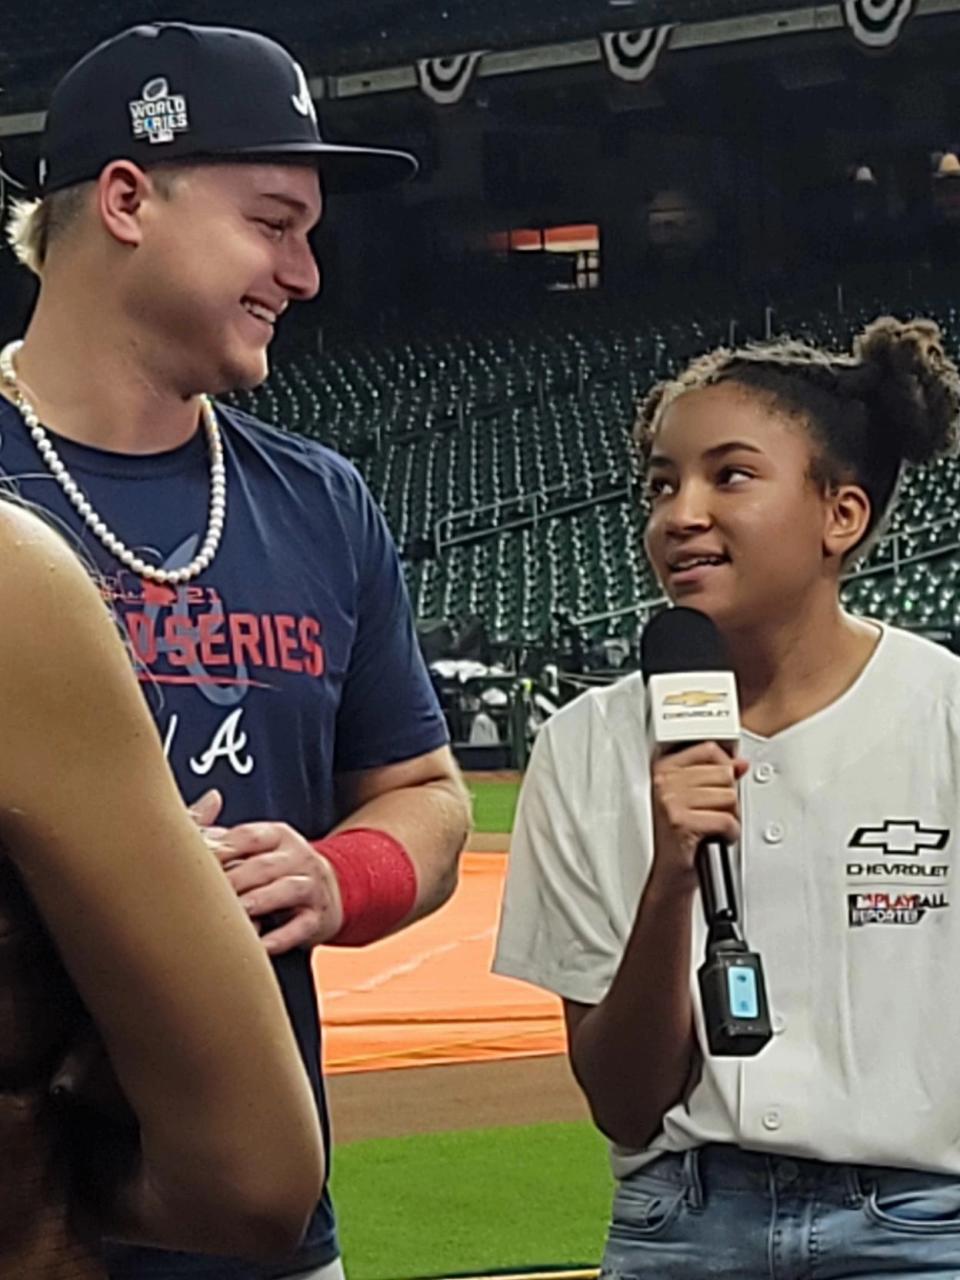 Zora Malone, right, interviews Atlanta Braves outfielder Joc Pederson before Game 1 of the MLB World Series in Houston in October.